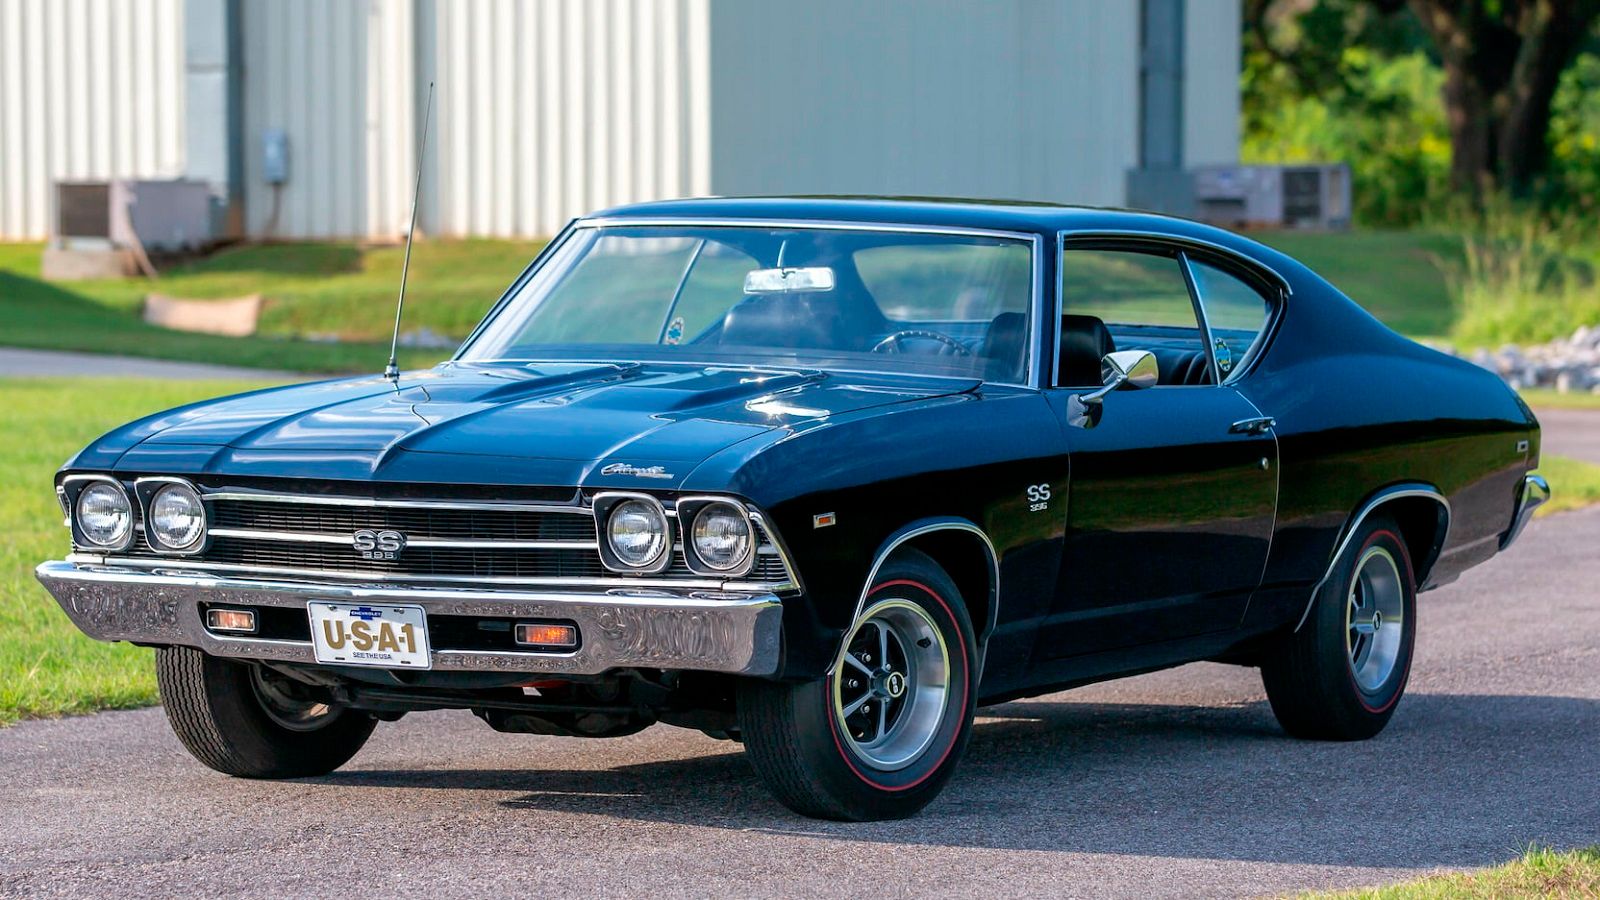 Origin of the 1969 Chevy Chevelle SS